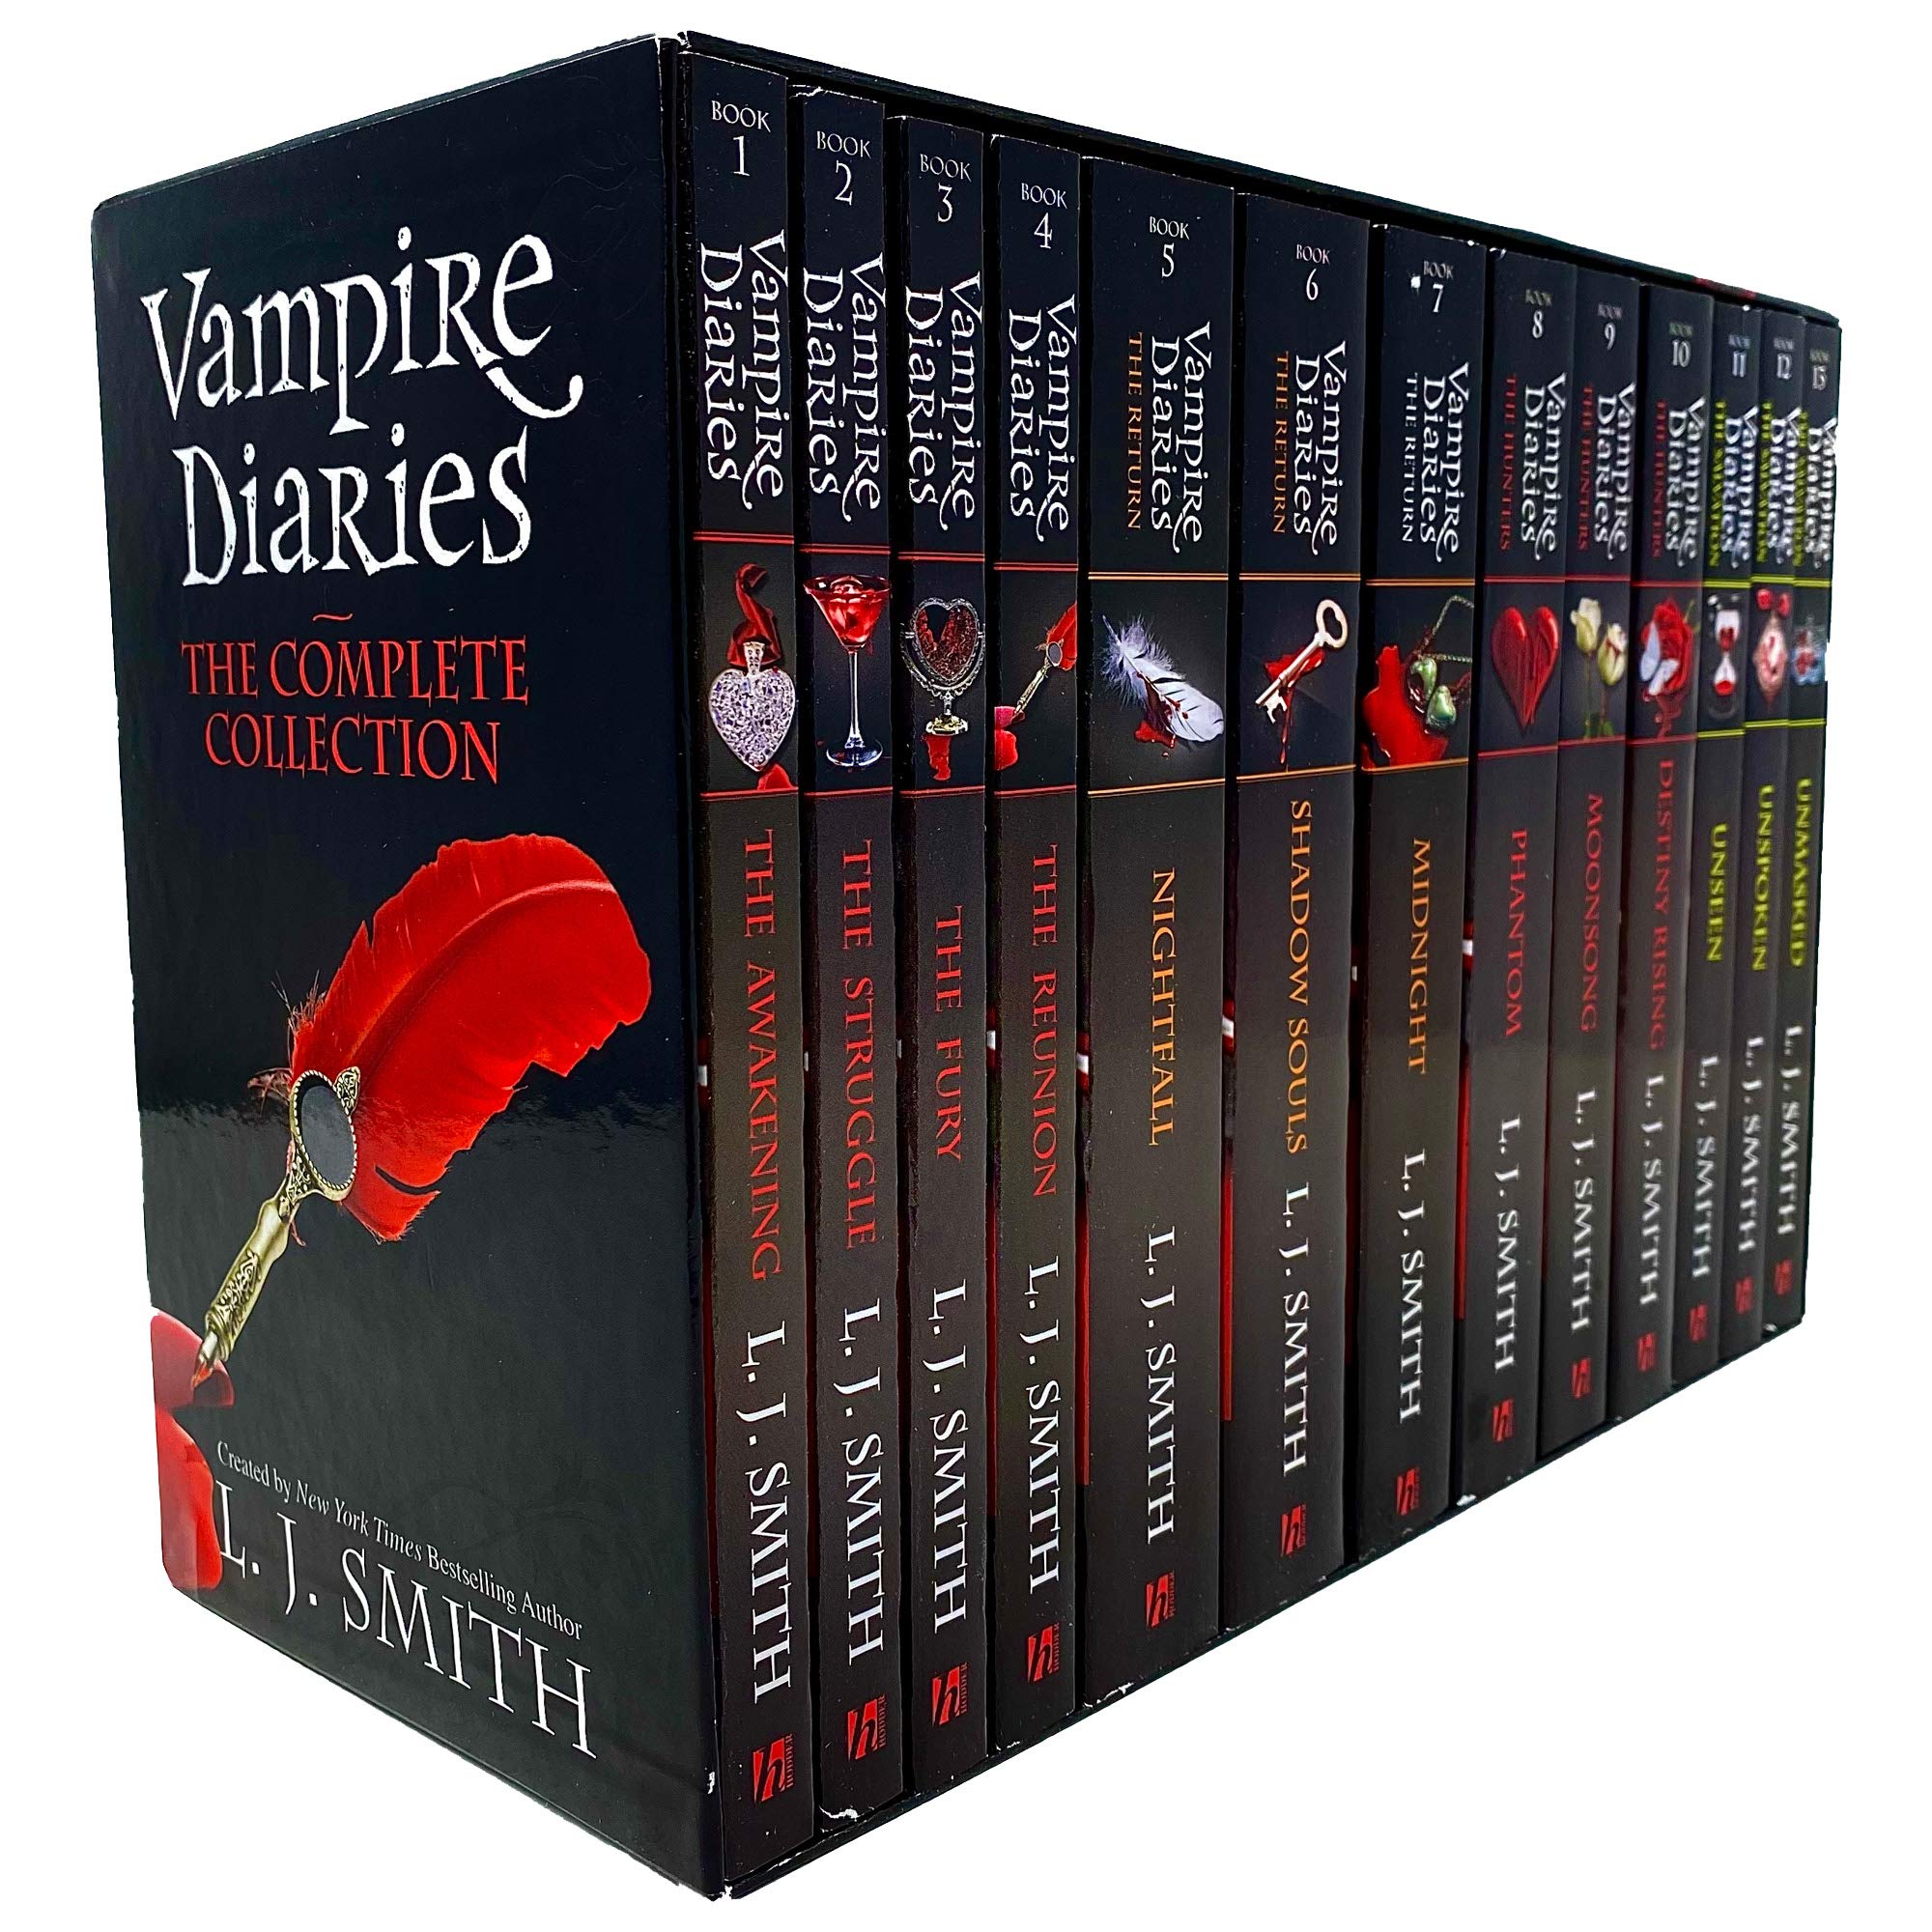 Vampire Diaries Complete Collection Books 1 - 13 Box Set by L. J. Smith Paperback - Lets Buy Books